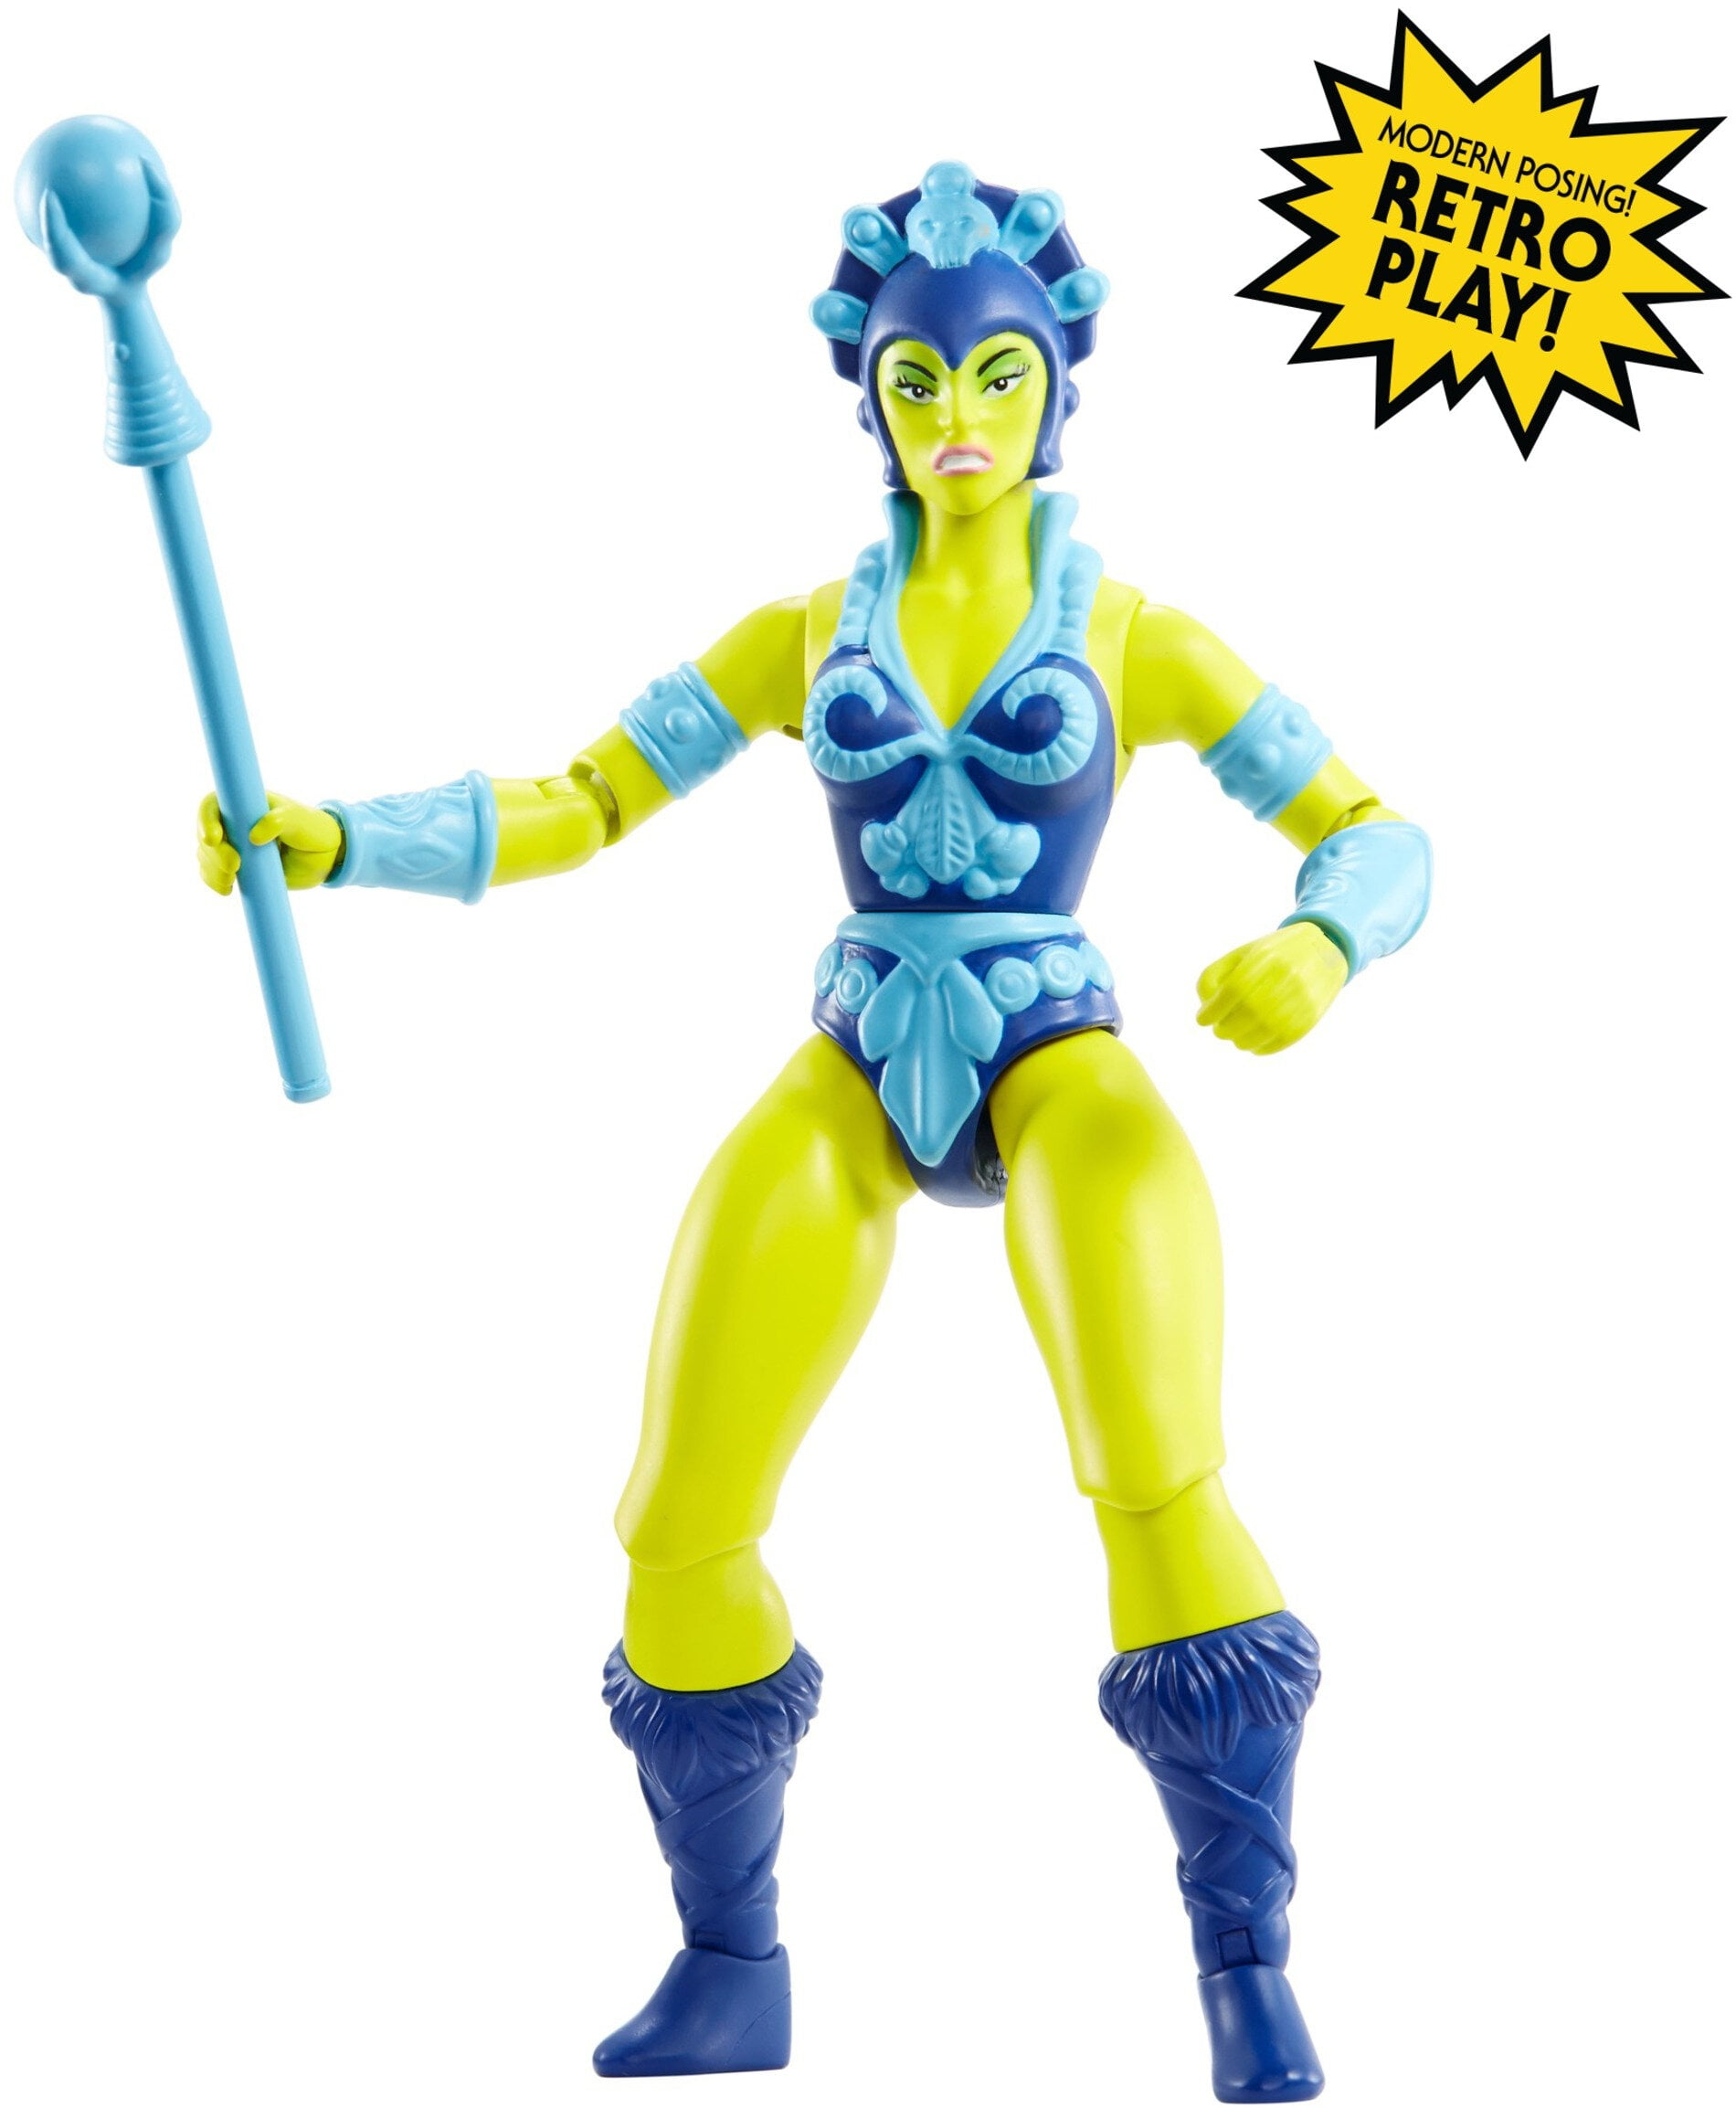 Masters Of The Universe EVIL-LYN Mattel Action Figure NEW 